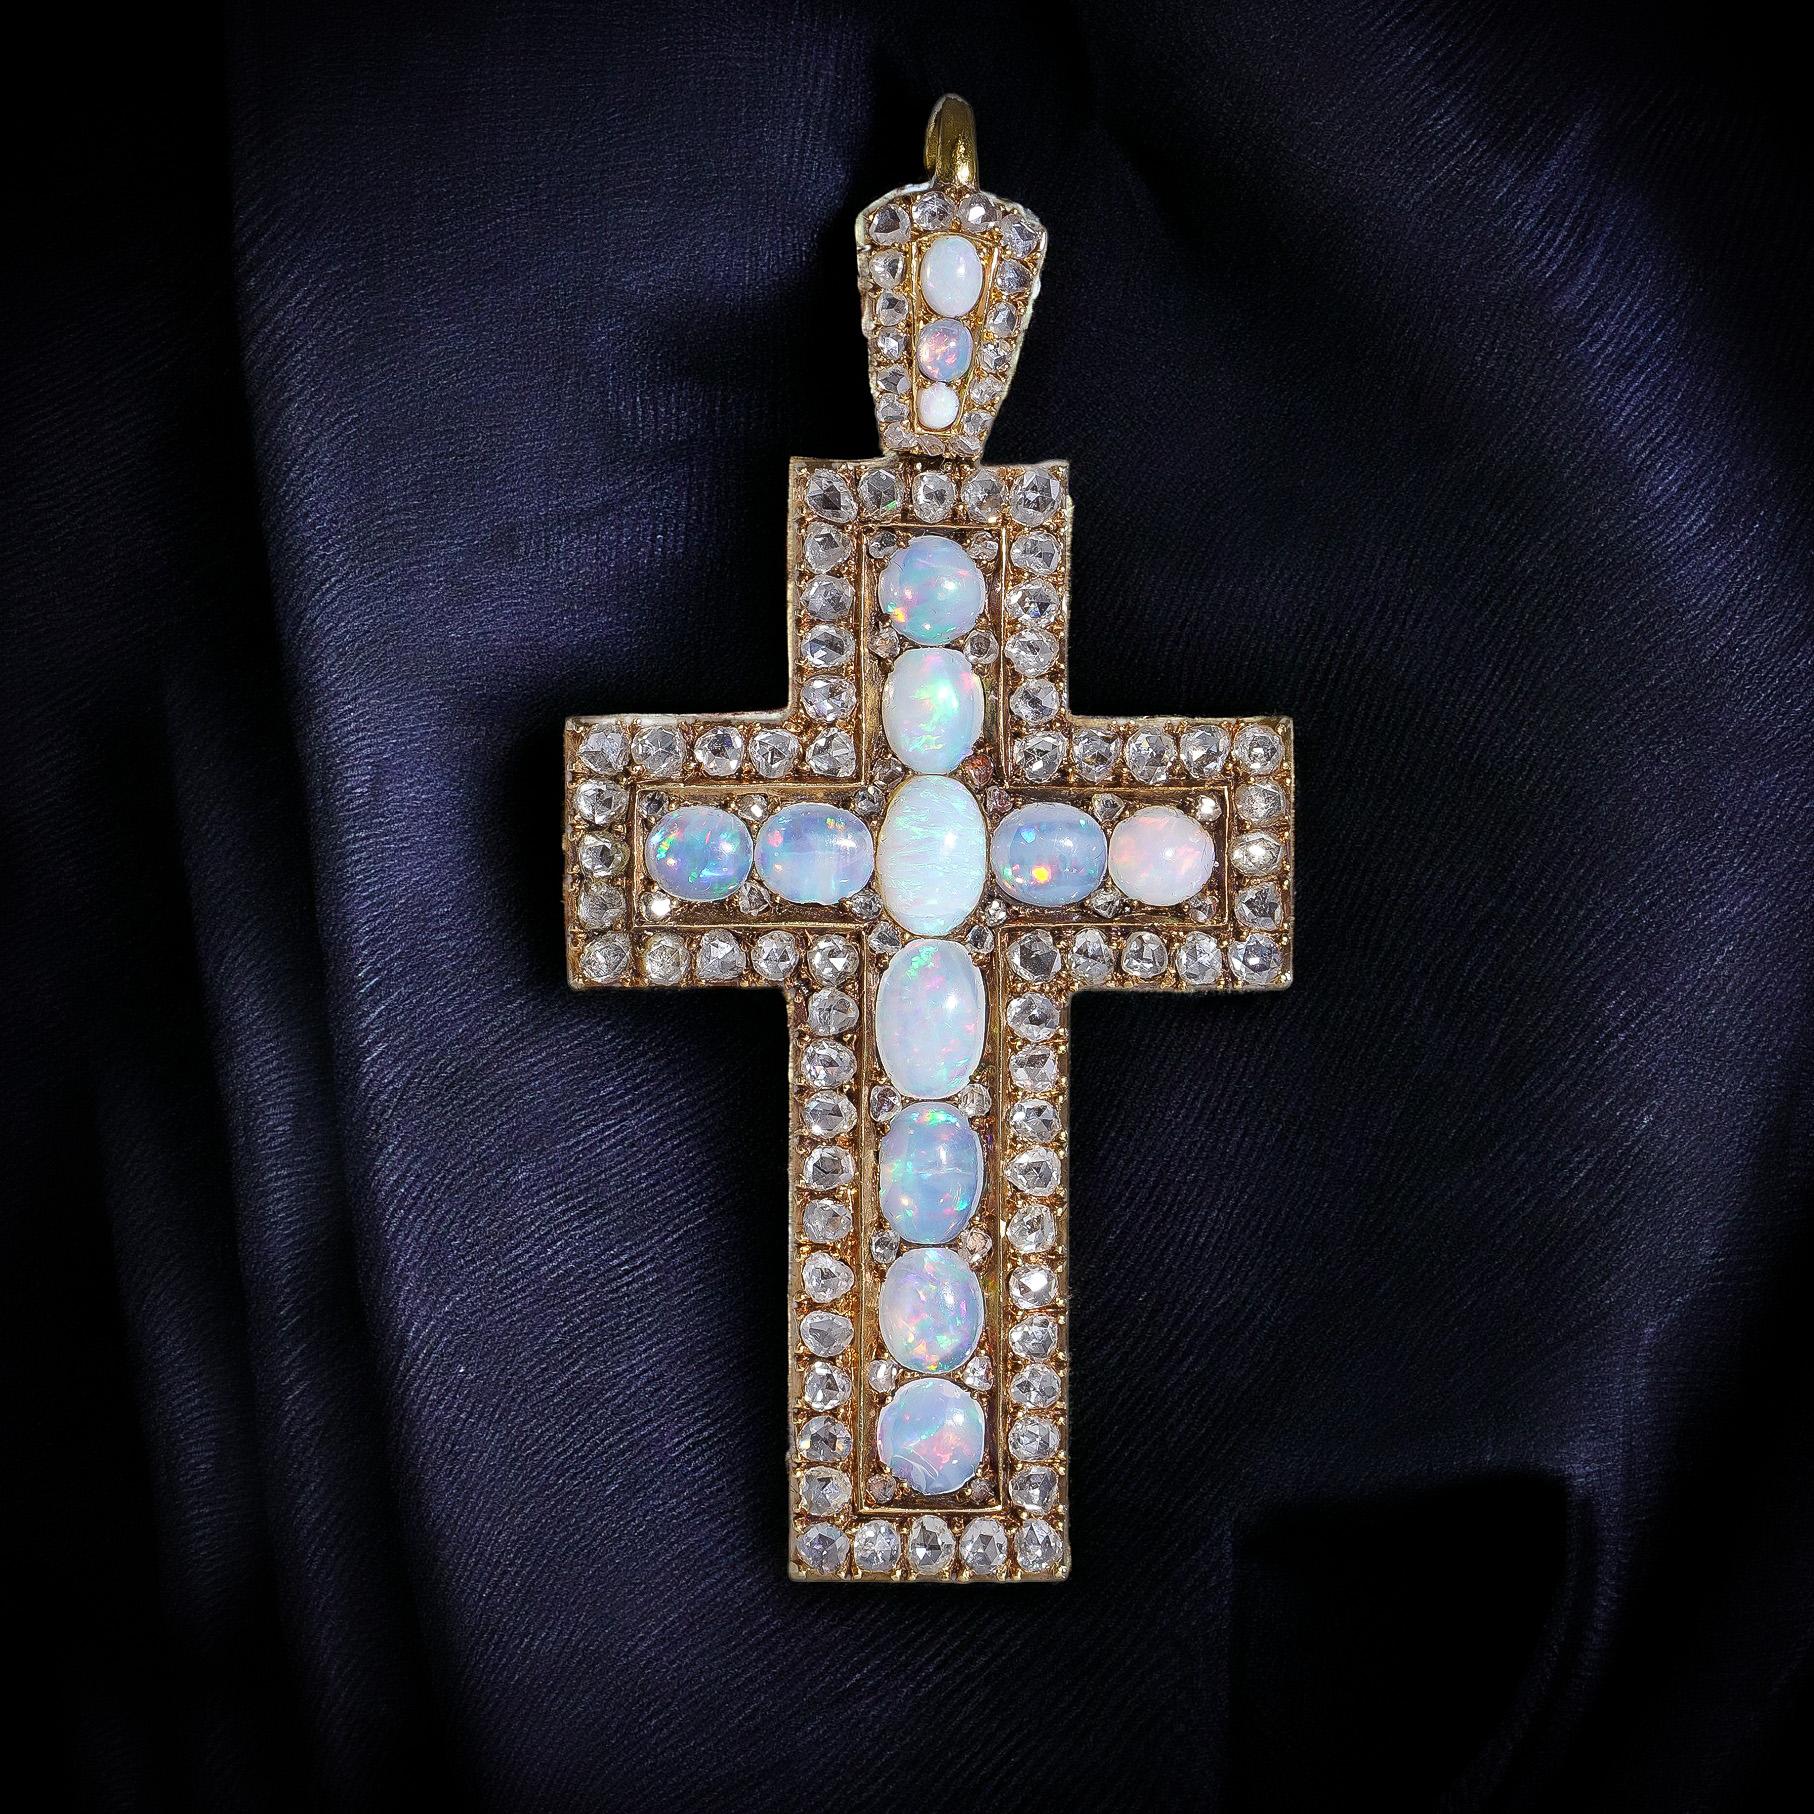 Antique 19th Century 20kt. yellow gold rose-cut diamond and opal cross pendant. 
X-Ray has been tested positive for 20 kt. gold. 

Dimensions - 
Length x width x height: 7.3 x 3.5 x 0.4 cm ( with bail ). 
Weight: 14.7 grams 

Diamonds -
Cut: Rose -